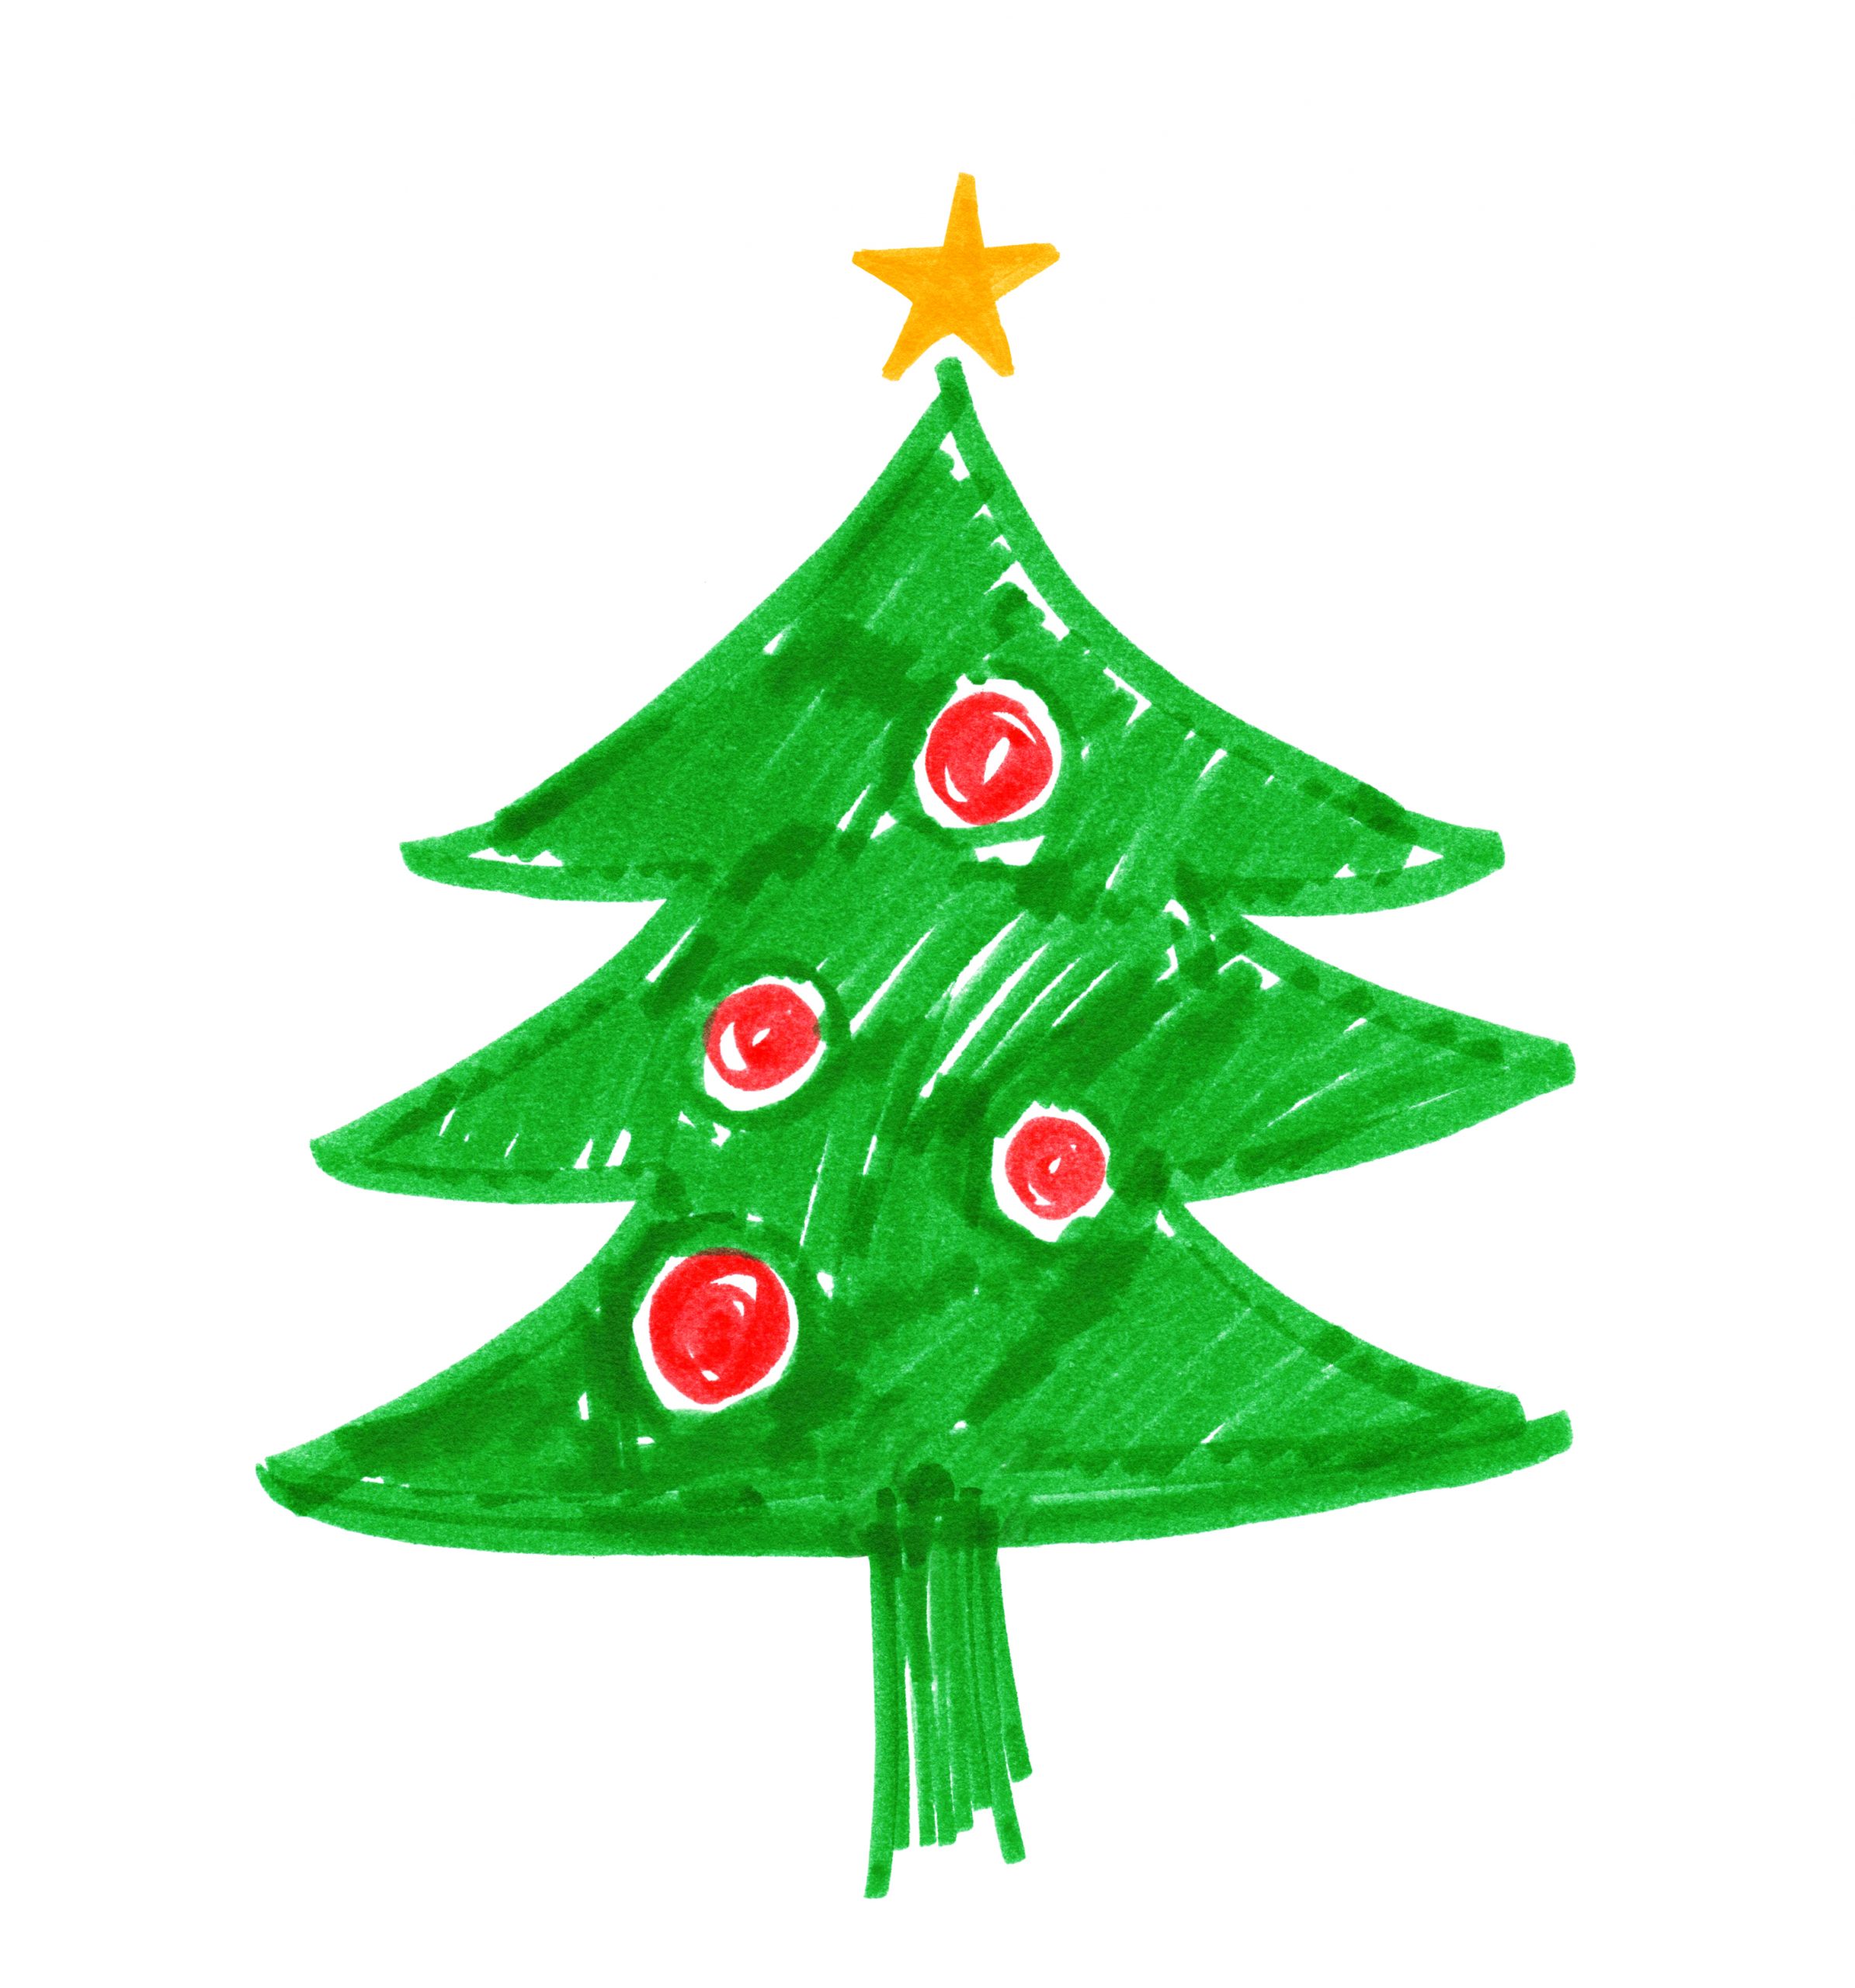 We’re Dreaming of a “Green” Christmas